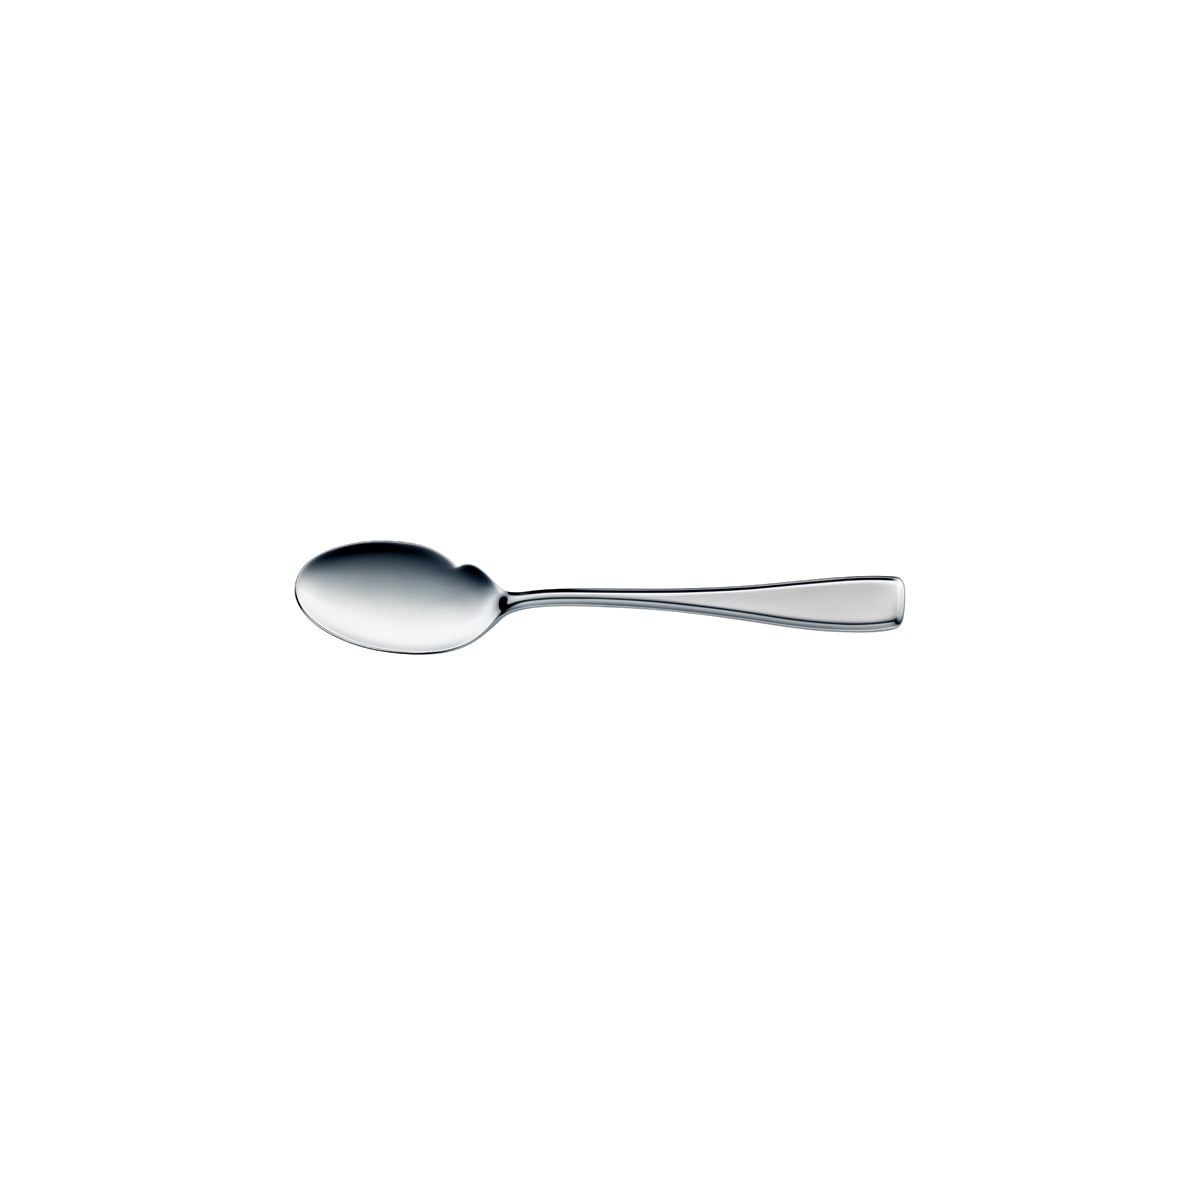 10.7911.6060 WMF Solid Gourmet Spoon Silverplated Tomkin Australia Hospitality Supplies